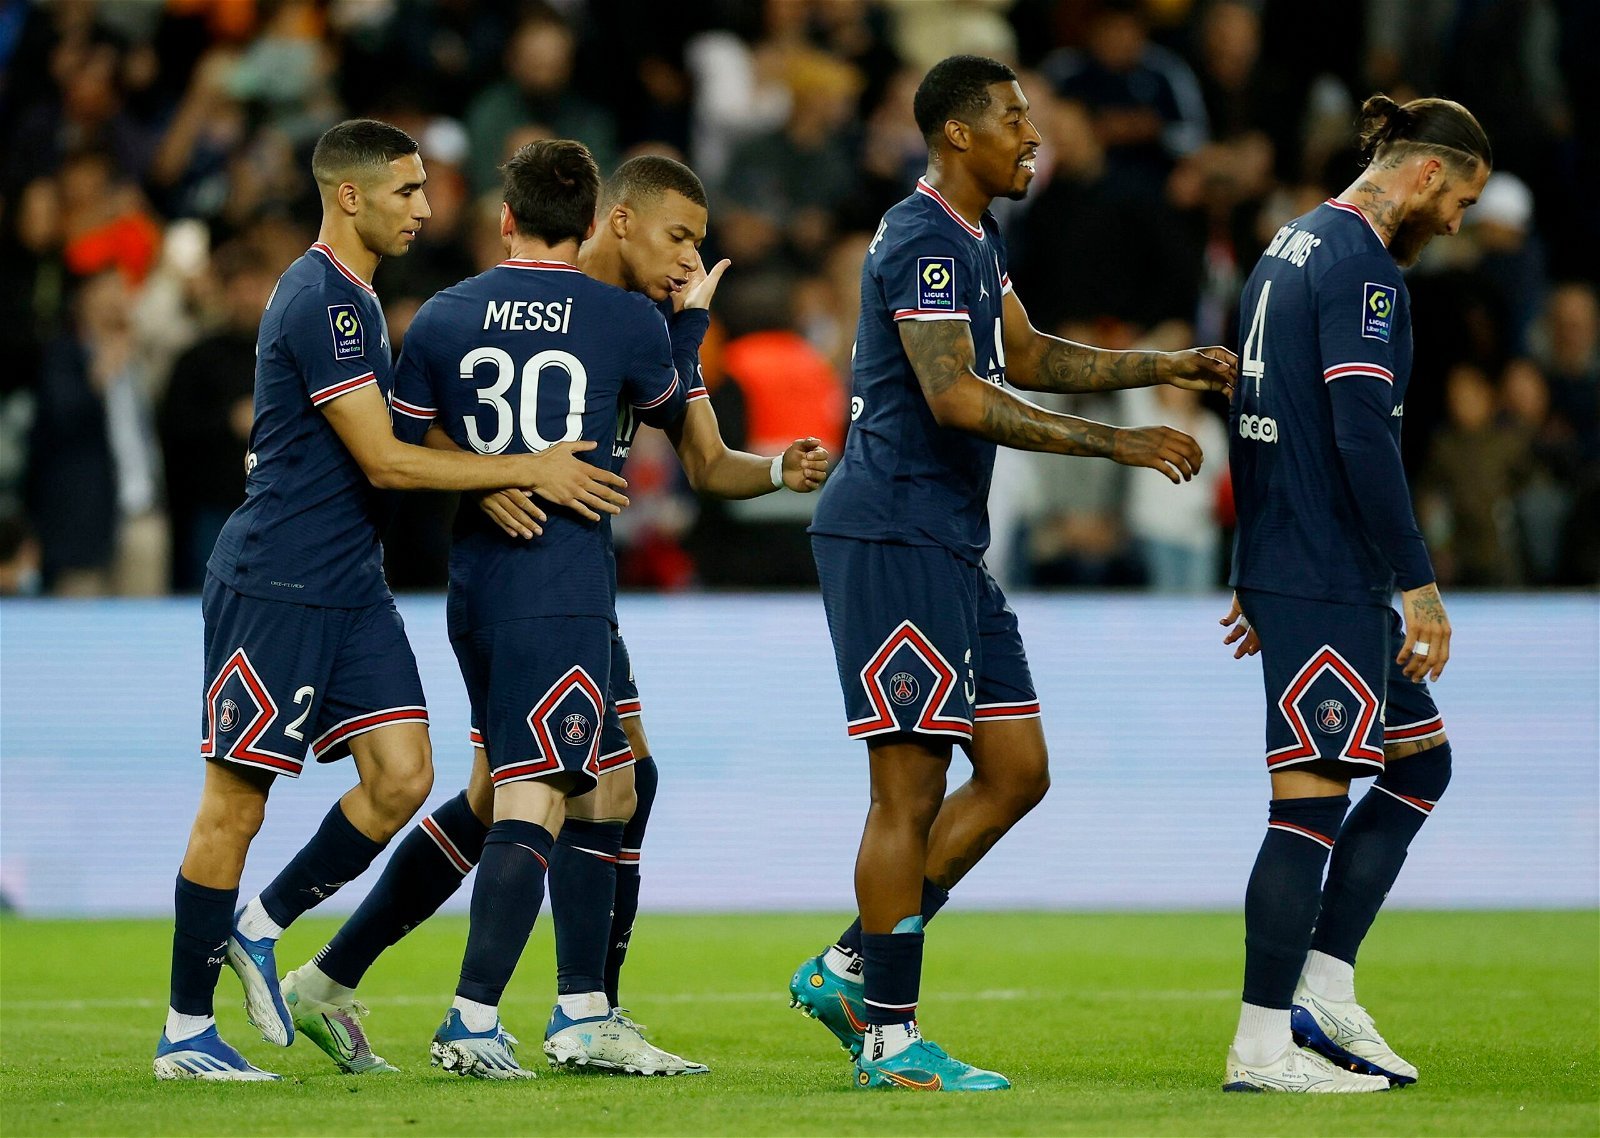 PSG pre-season 2022/23: Schedule, fixtures and more - Sportings News